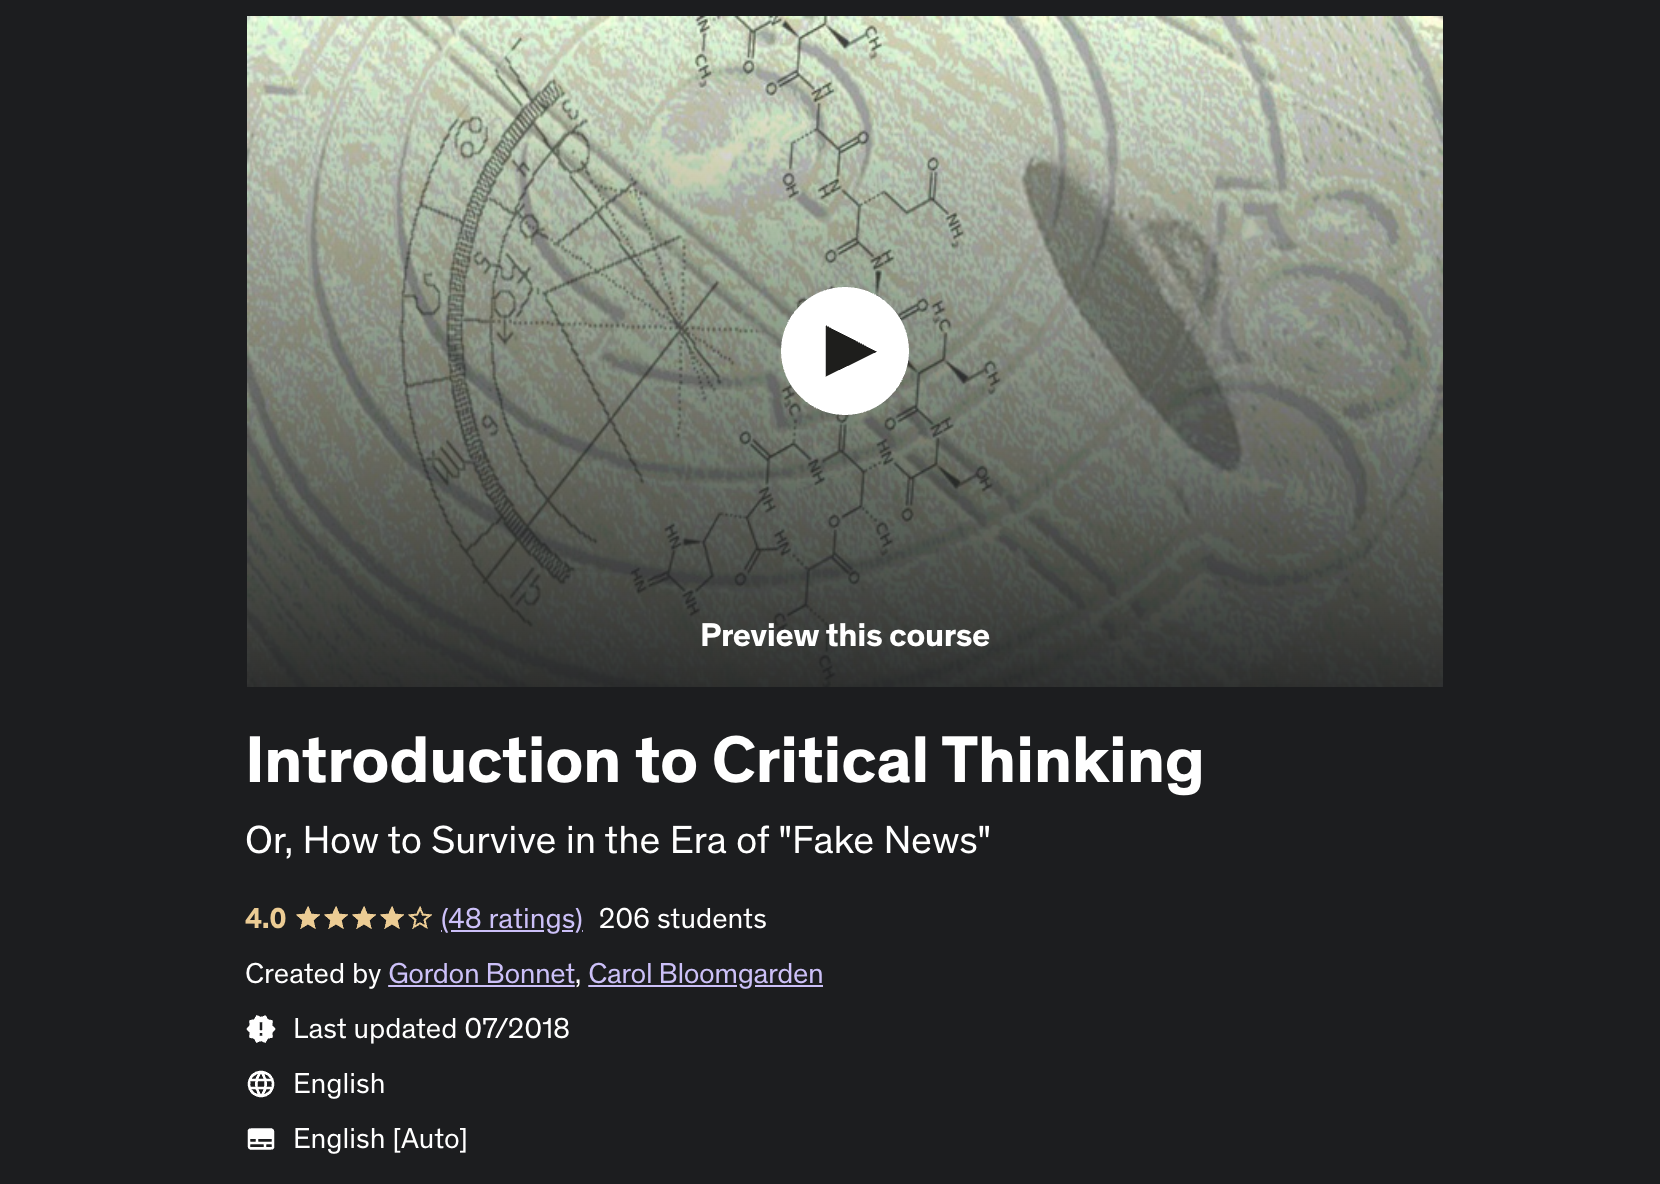 The Gateway to Critical Thinking